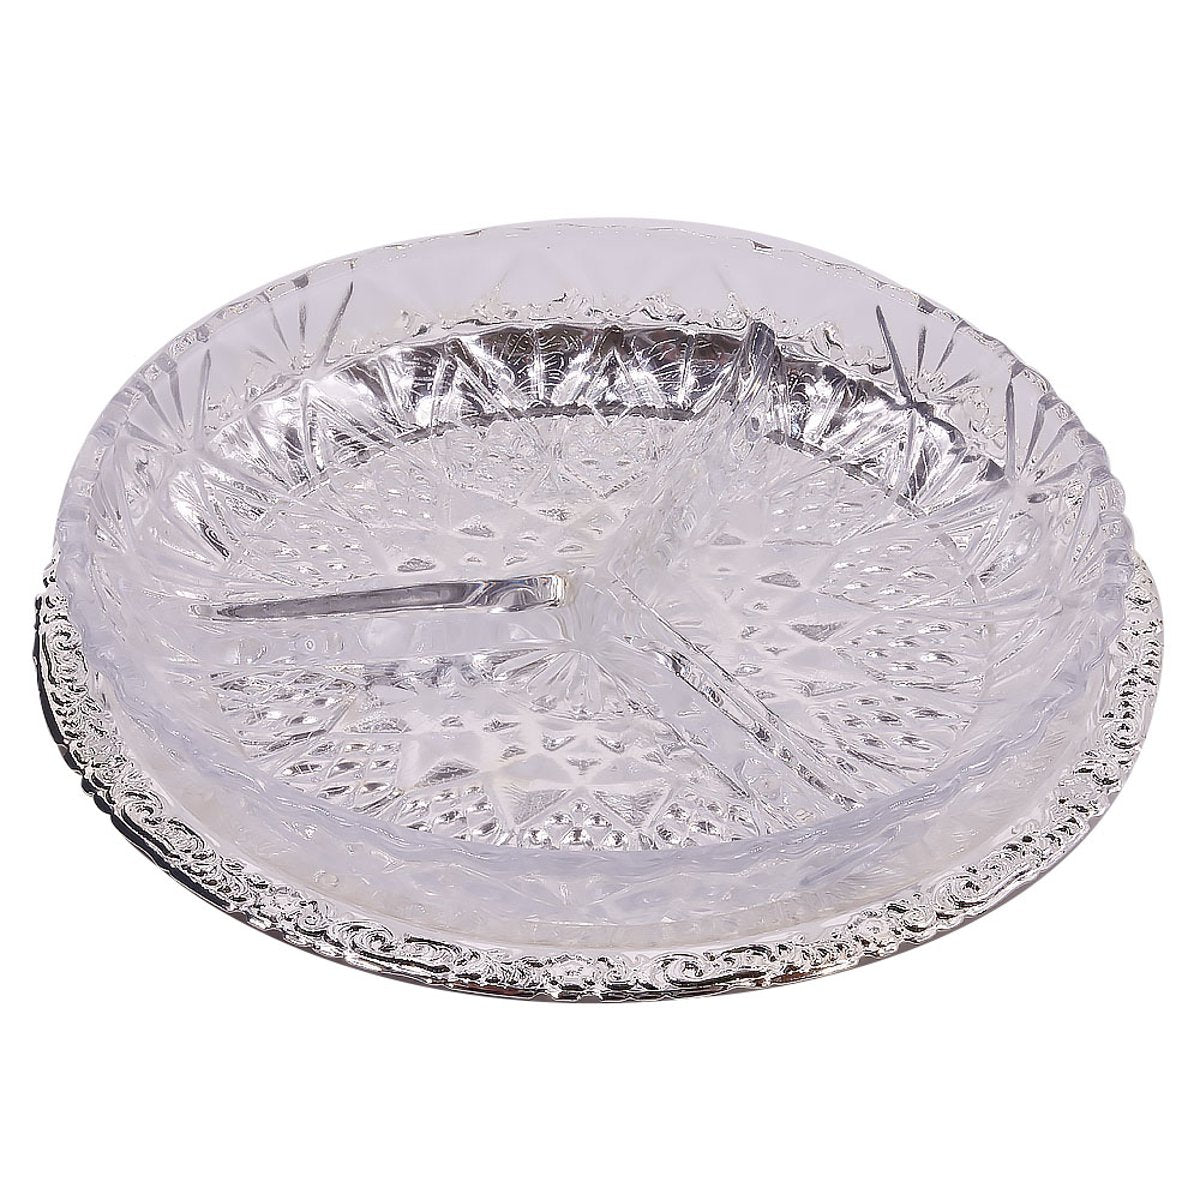 Queen Anne 3 Section Hors d'oeuvre on Tray 9.5" Diameter Silver Plated - Royal Gift